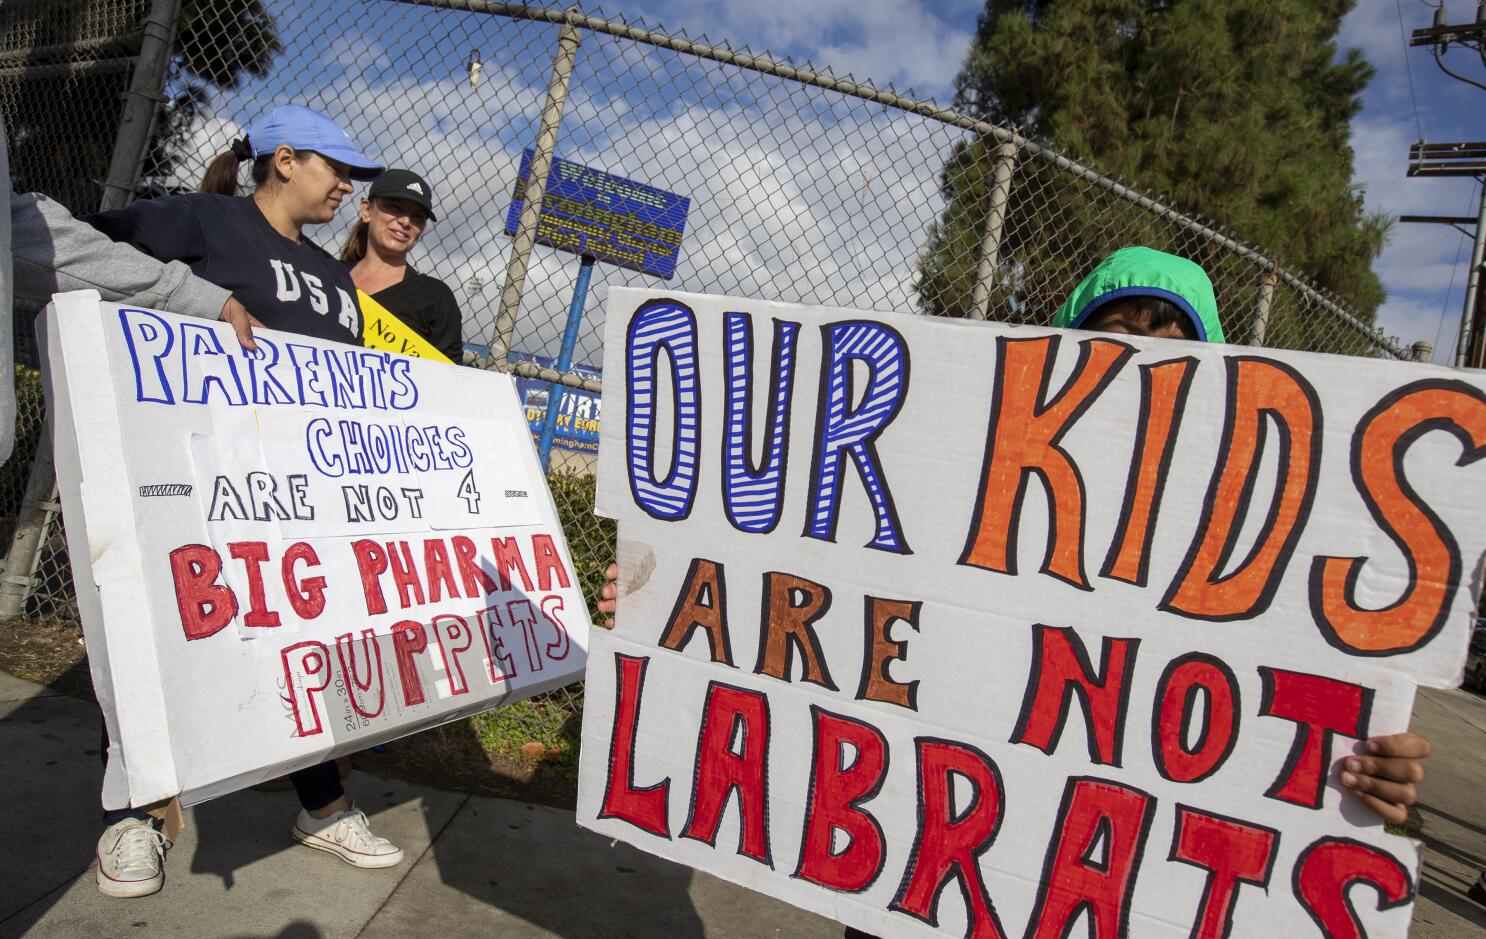 How to handle an anti-vaccine protest against schools - Los Angeles Times